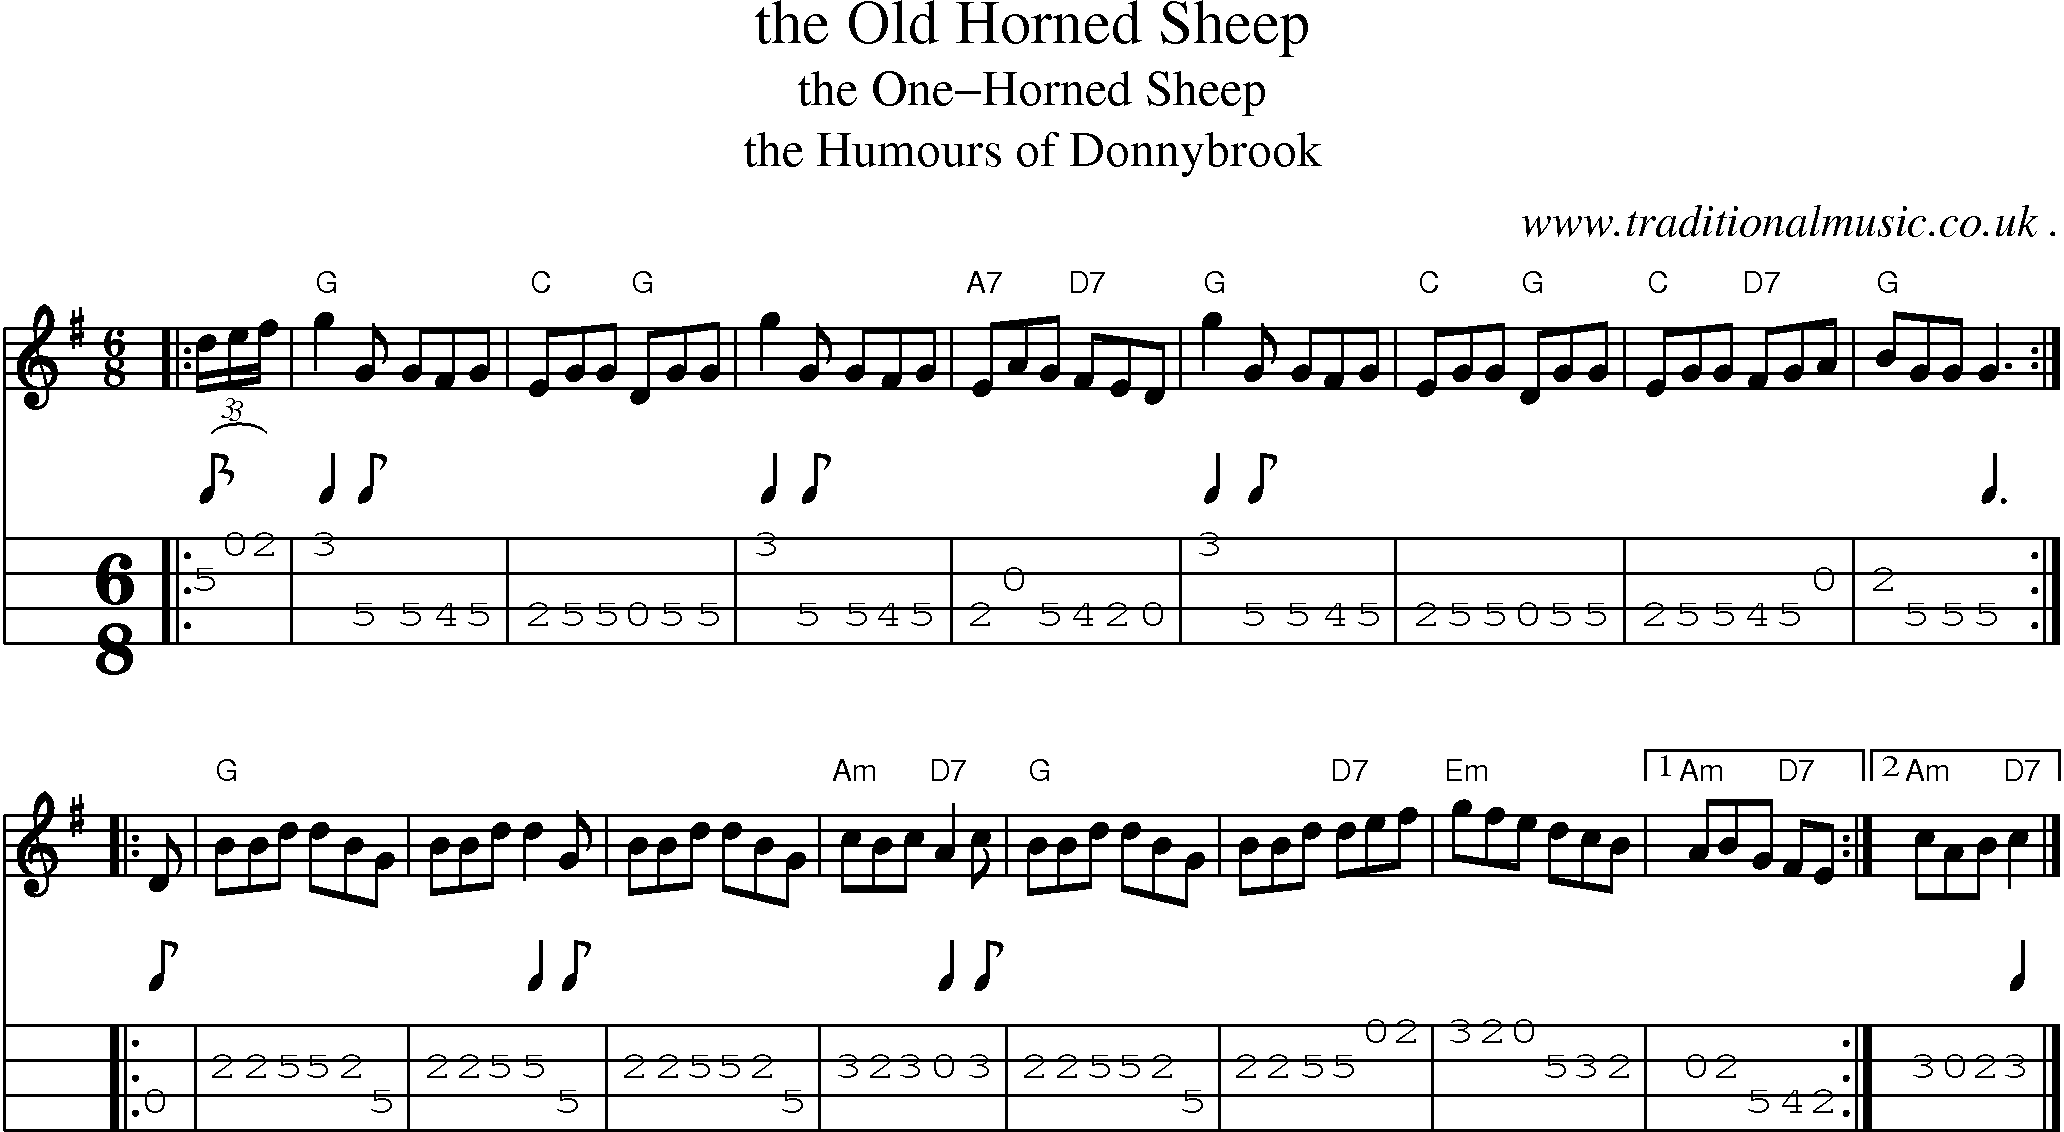 Sheet-music  score, Chords and Mandolin Tabs for The Old Horned Sheep